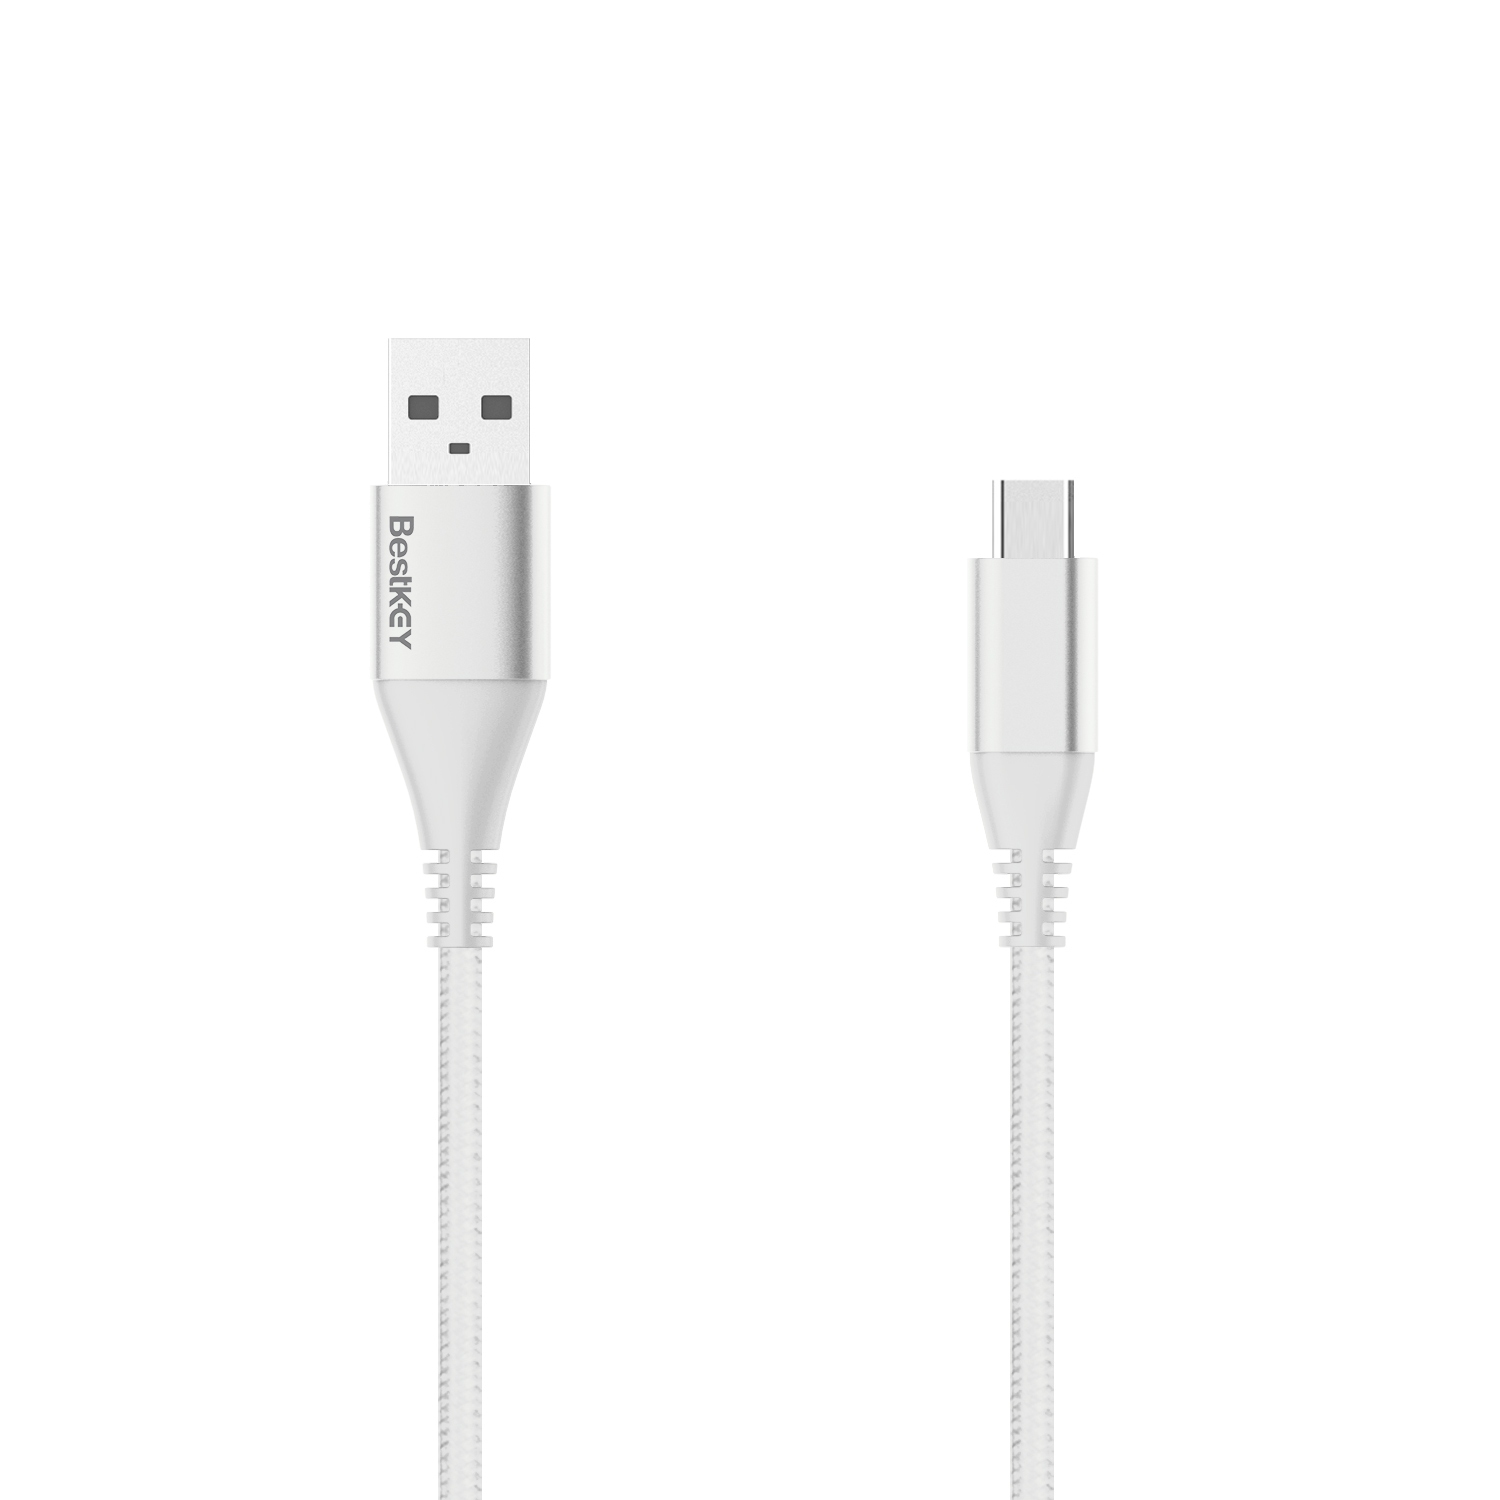 PS5 USB Type C Charging Braided USB C Cable - 2.4A Fast Charger USB C Braided Cable Works with PS5 DualSense Controller, Nintendo Switch, Xbox X, Samsung Galaxy Note Ultra, Android Silver